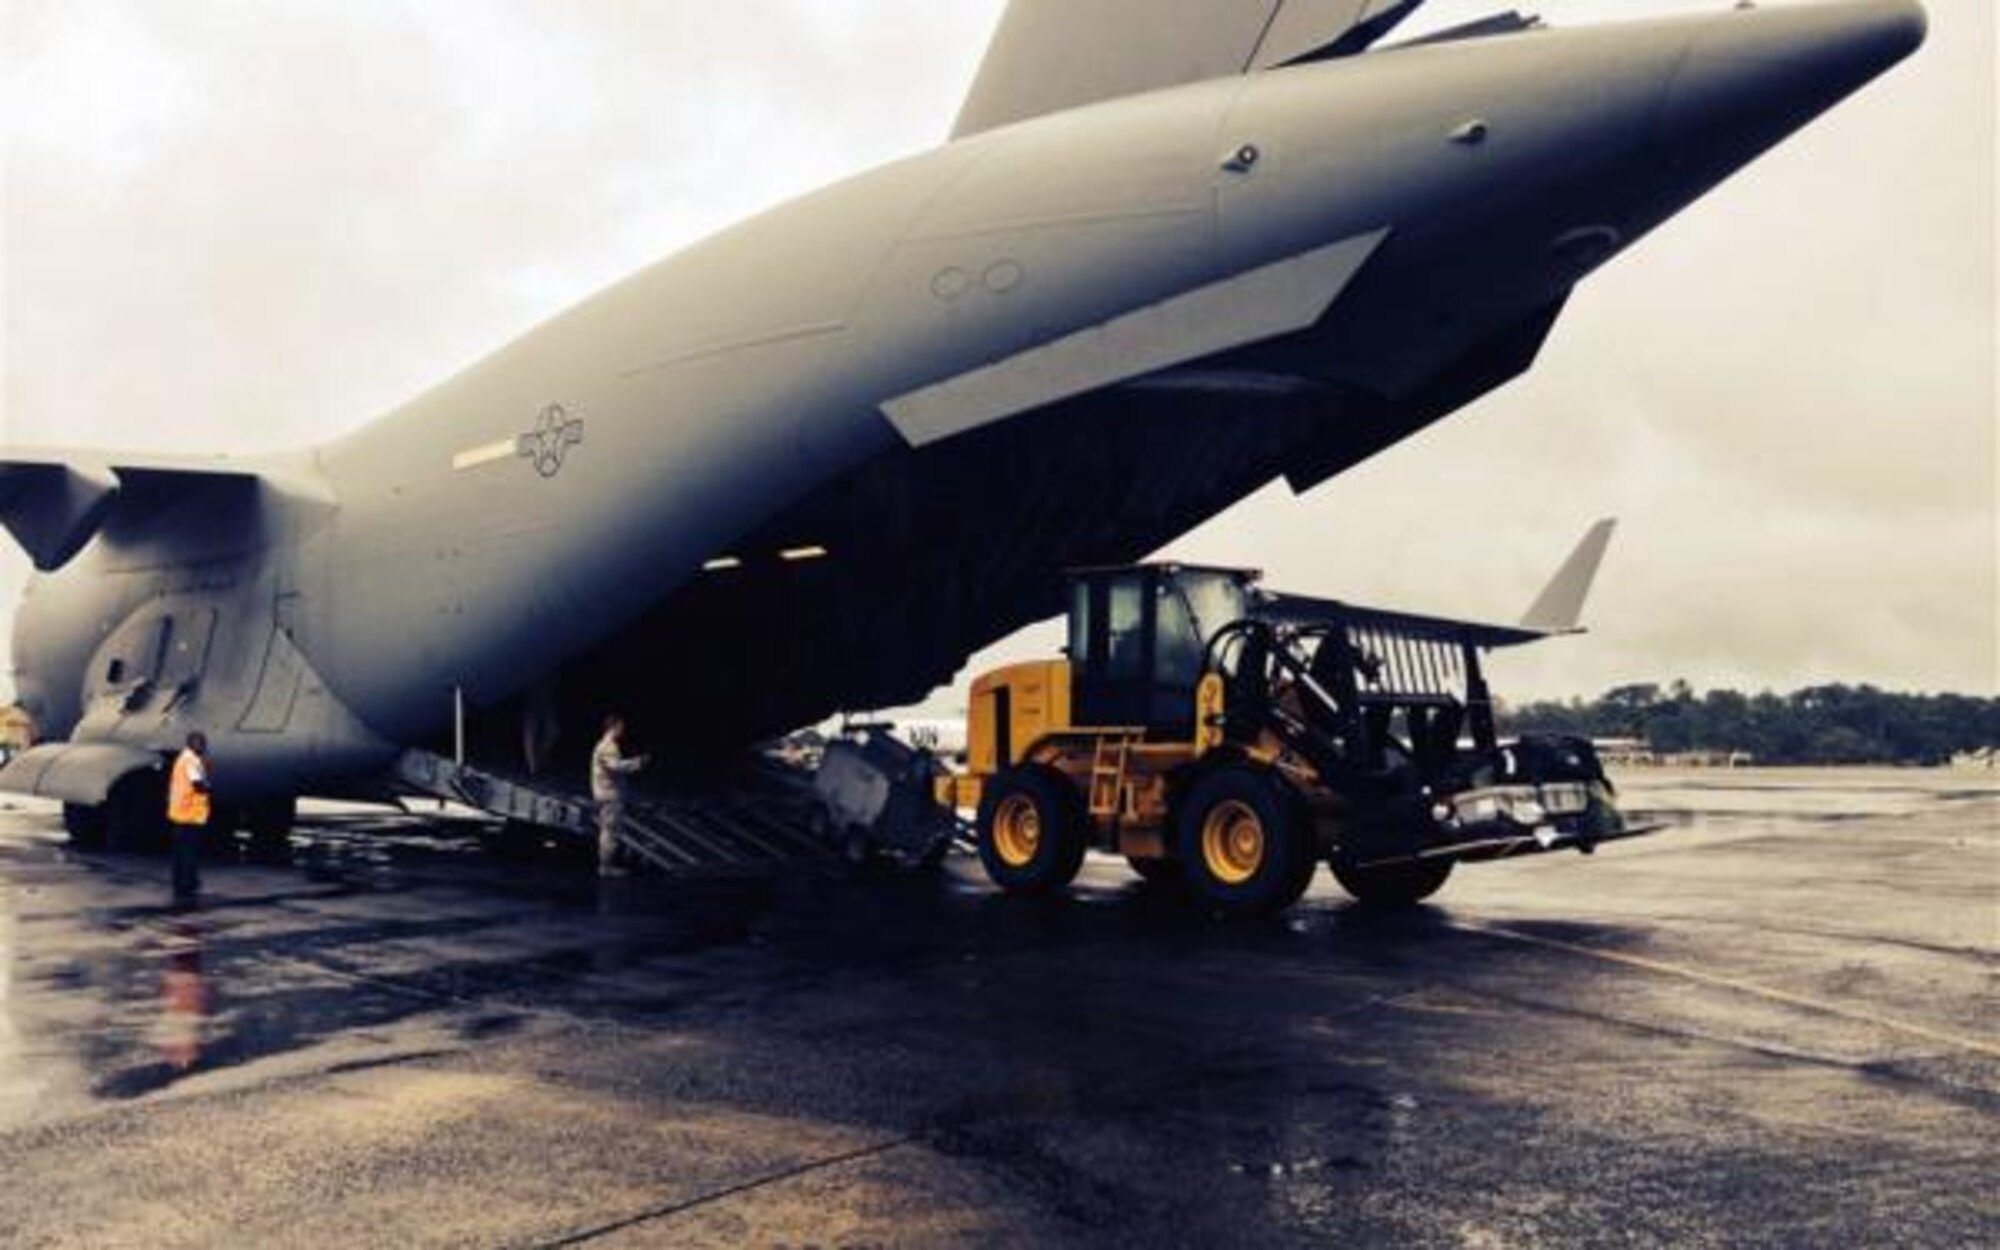 Team McChord Airmen unload a C-17 Globemaster III in Liberia, October 8, 2014. The Airmen assisted during an ebola outbreak in West Africa.